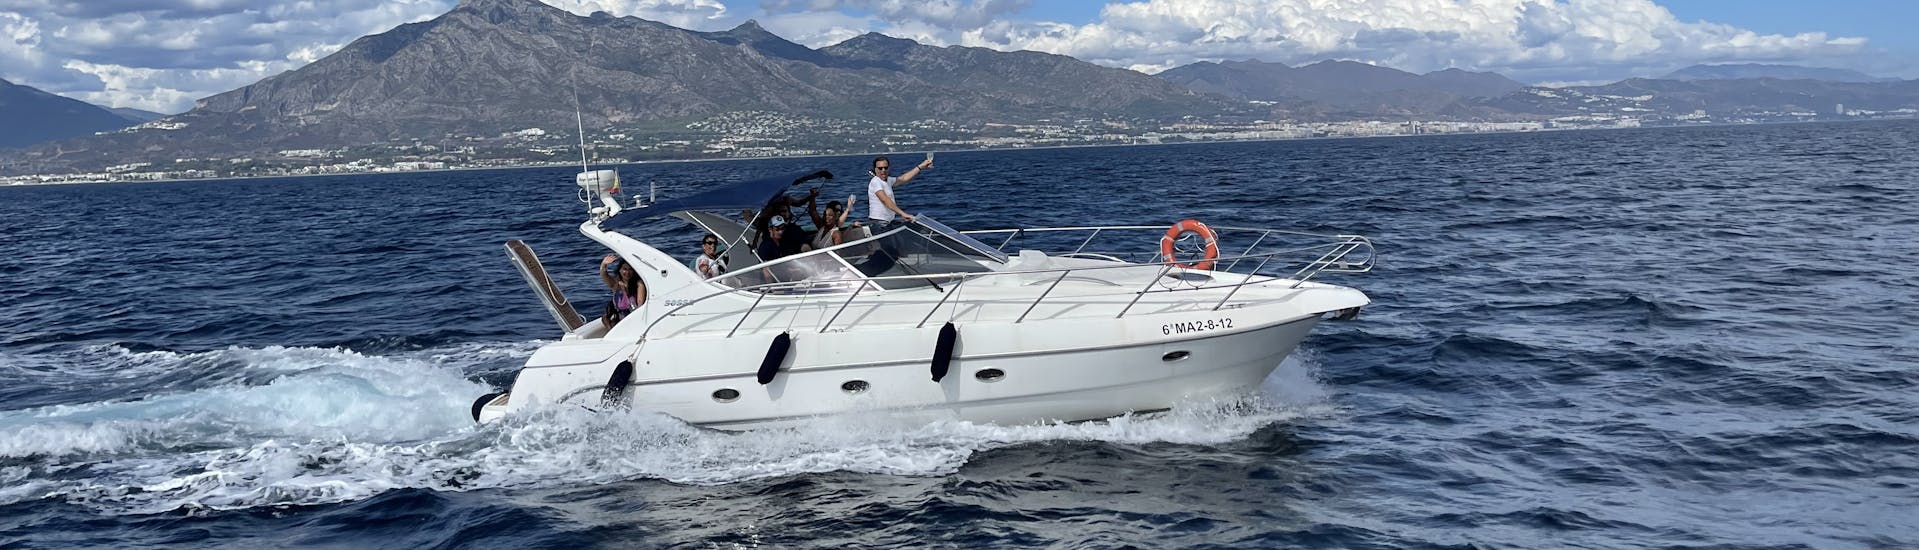 A photo of a private boat trip from Puerto Banús along Costa del Sol with Royal Catamarán Marbella.